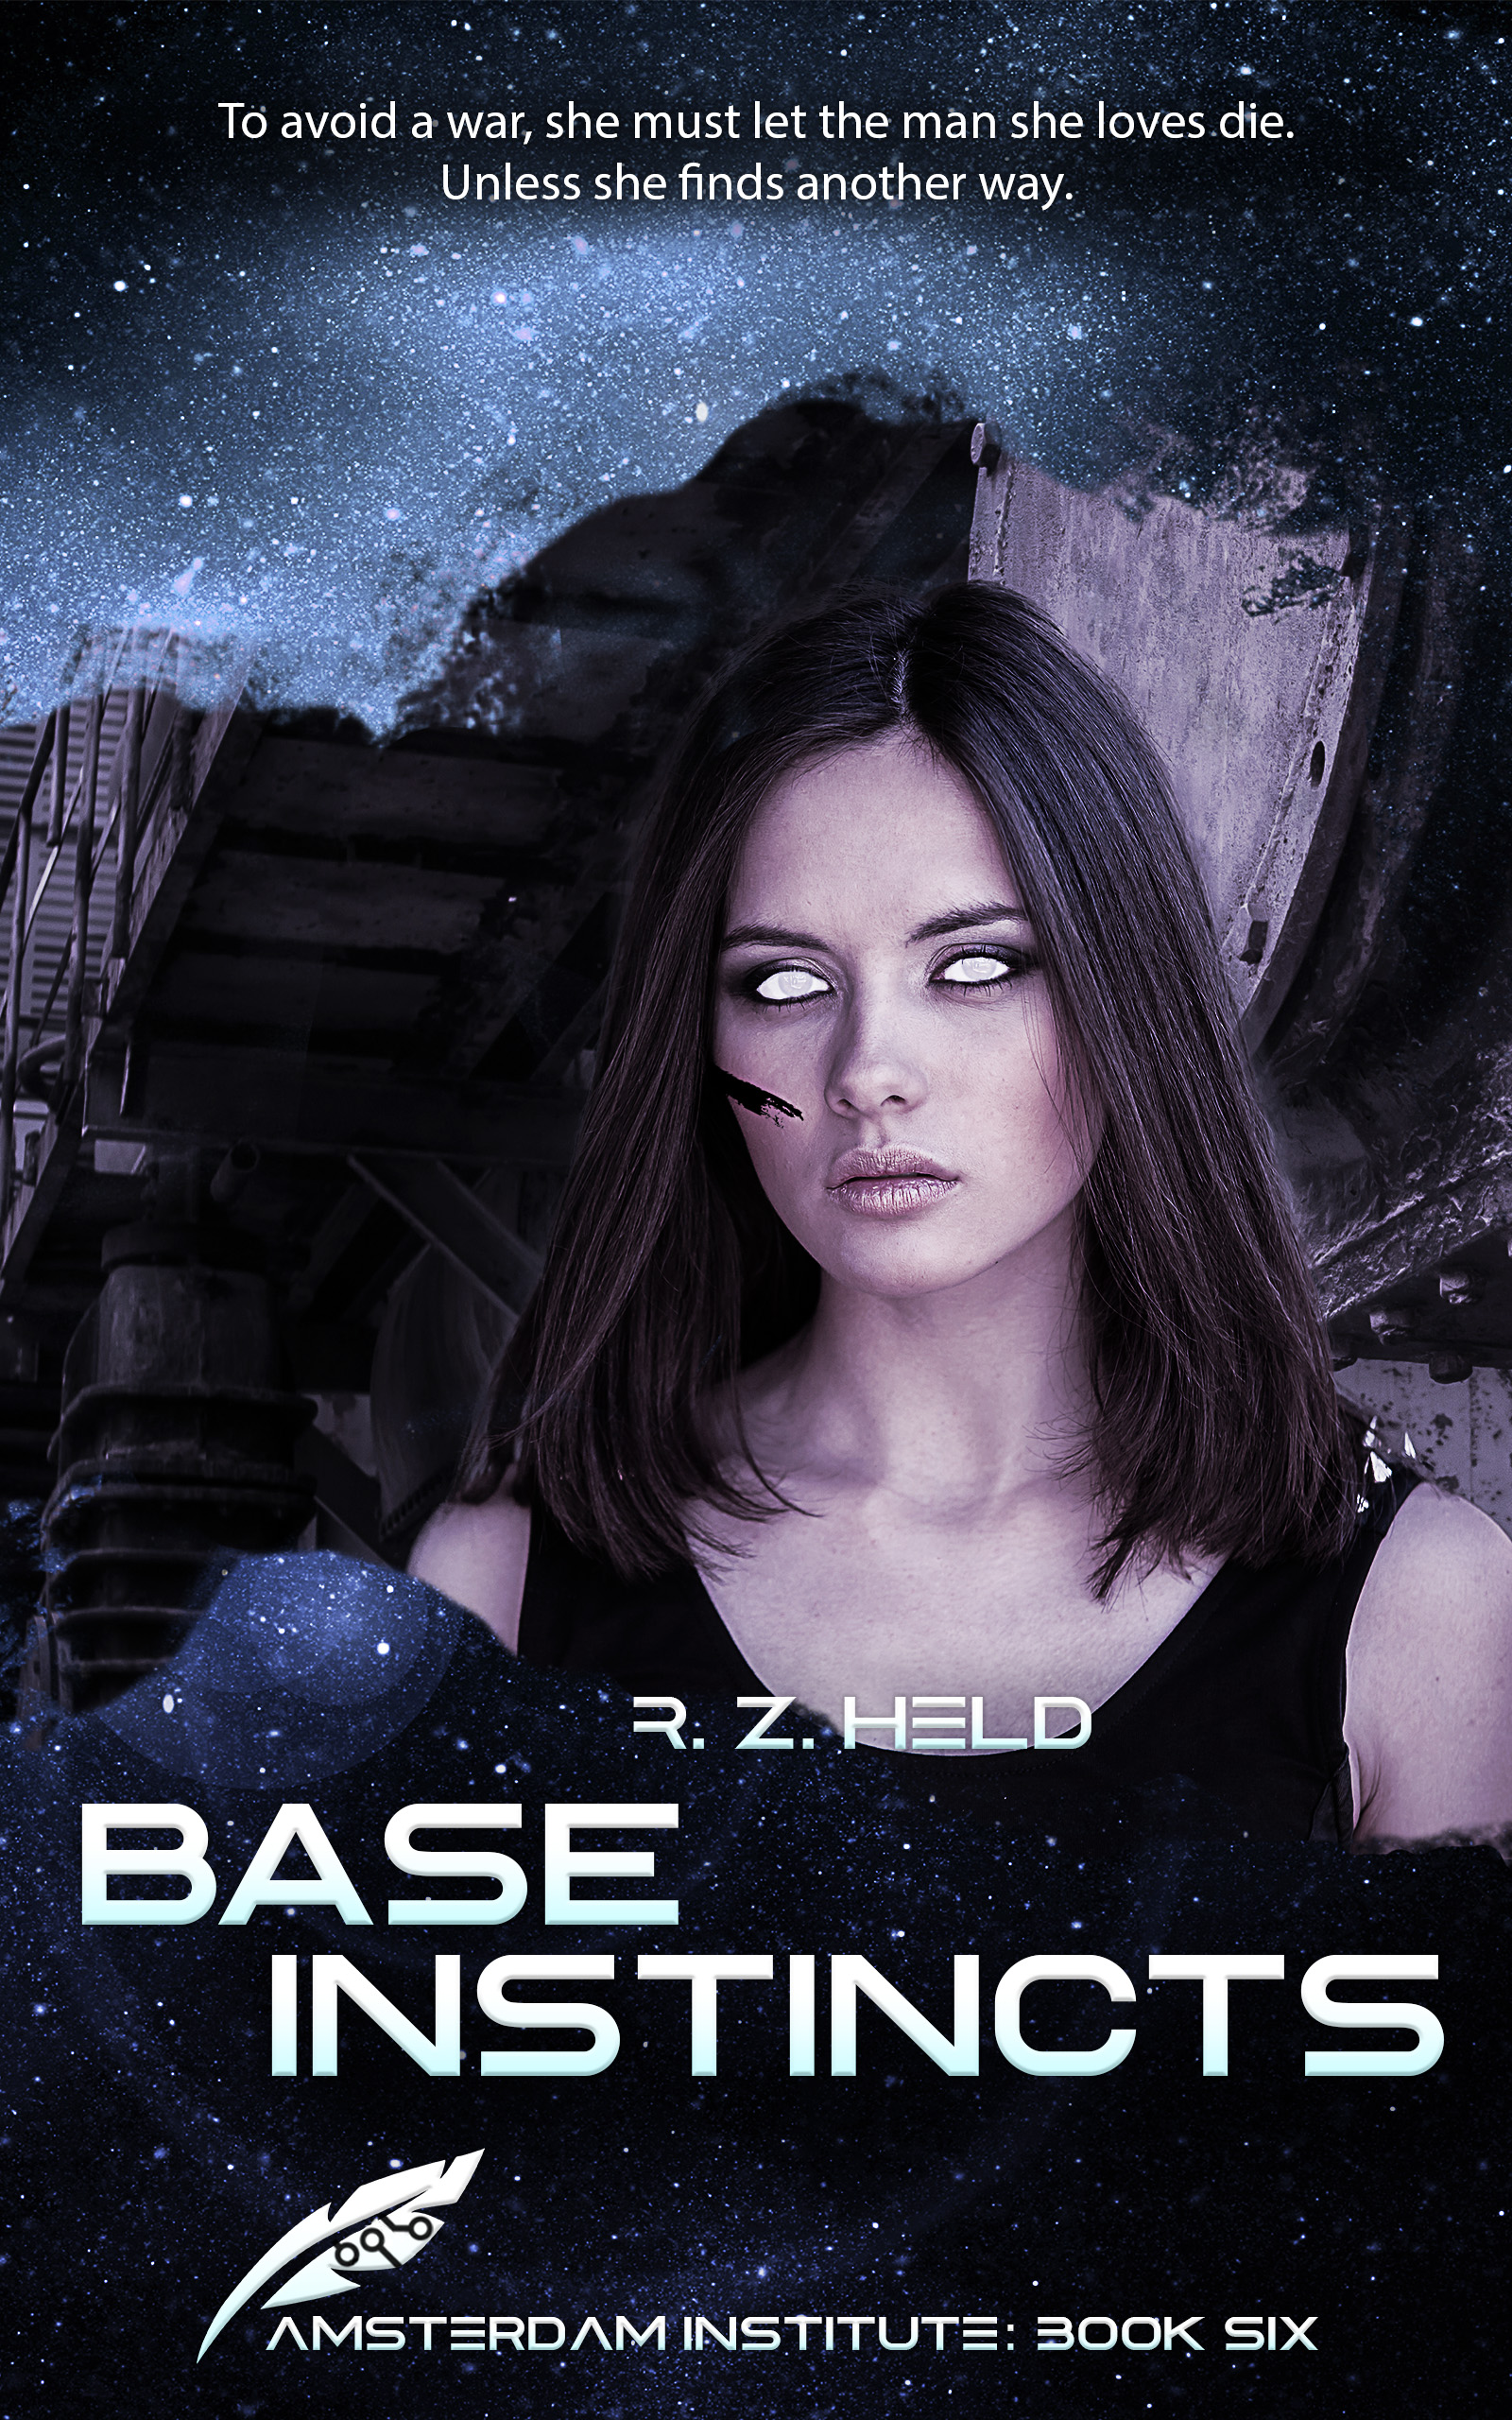 A book cover with a woman with white eyes on a background of stars and machinery